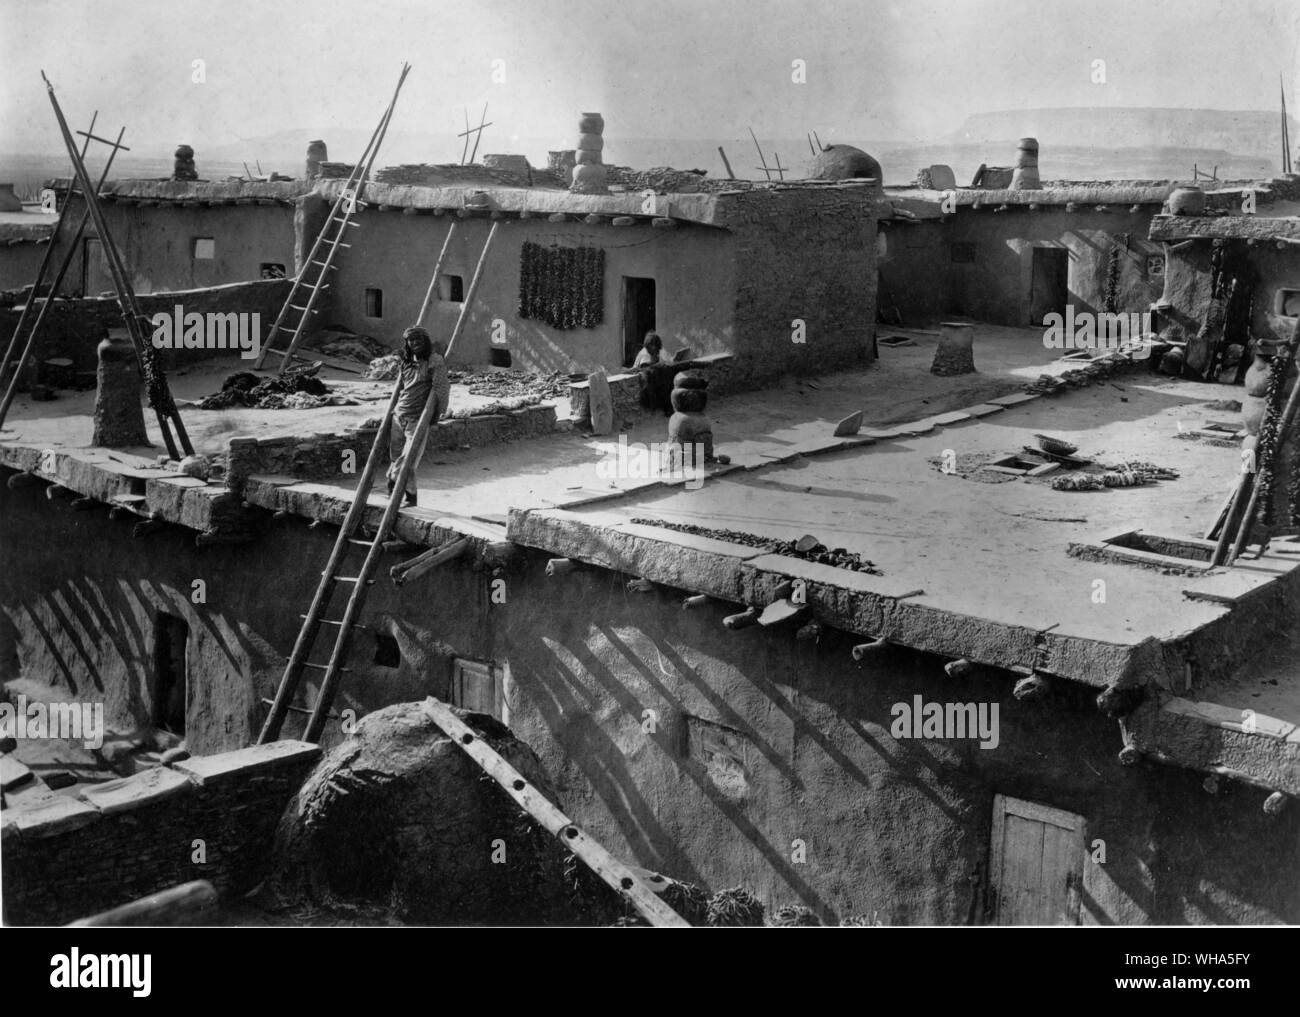 1879. Typical terraced pueblo type of architecture. Closeup shows how the rooftops of the lower levels were used as dooryards for the higher stories. Many of the household tasks such as drying fruits and vegetables were and are performed on these areas. The rectangular opening with projecting ladder in the right hand roof indicates that the room below is a ceremonial chamber. During ceremonies all entering and leaving is through the roof opening.Under normal circumstances the door on the ground level is used. The other rectangular openings in that particular roof are for the admittance of Stock Photo